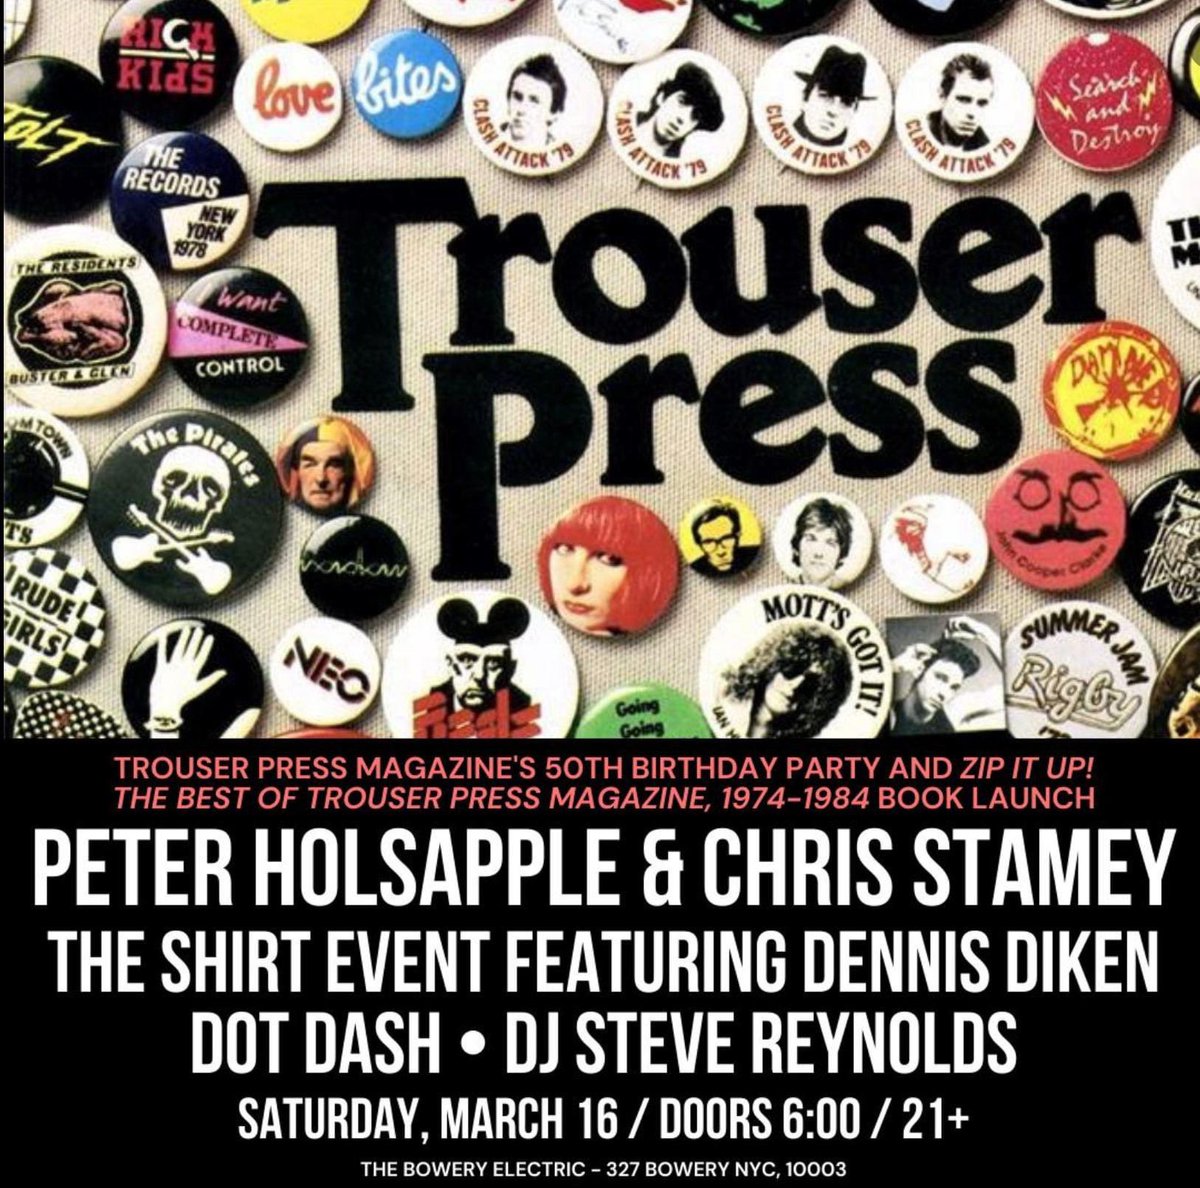 NYC! Dennis Diken of @SmithereensHQ will be performing at the 50th anniversary of @trouserpress at @theboweryelectric on Saturday, March 16. @trouserpressbooks #trouserpress #thesmithereens